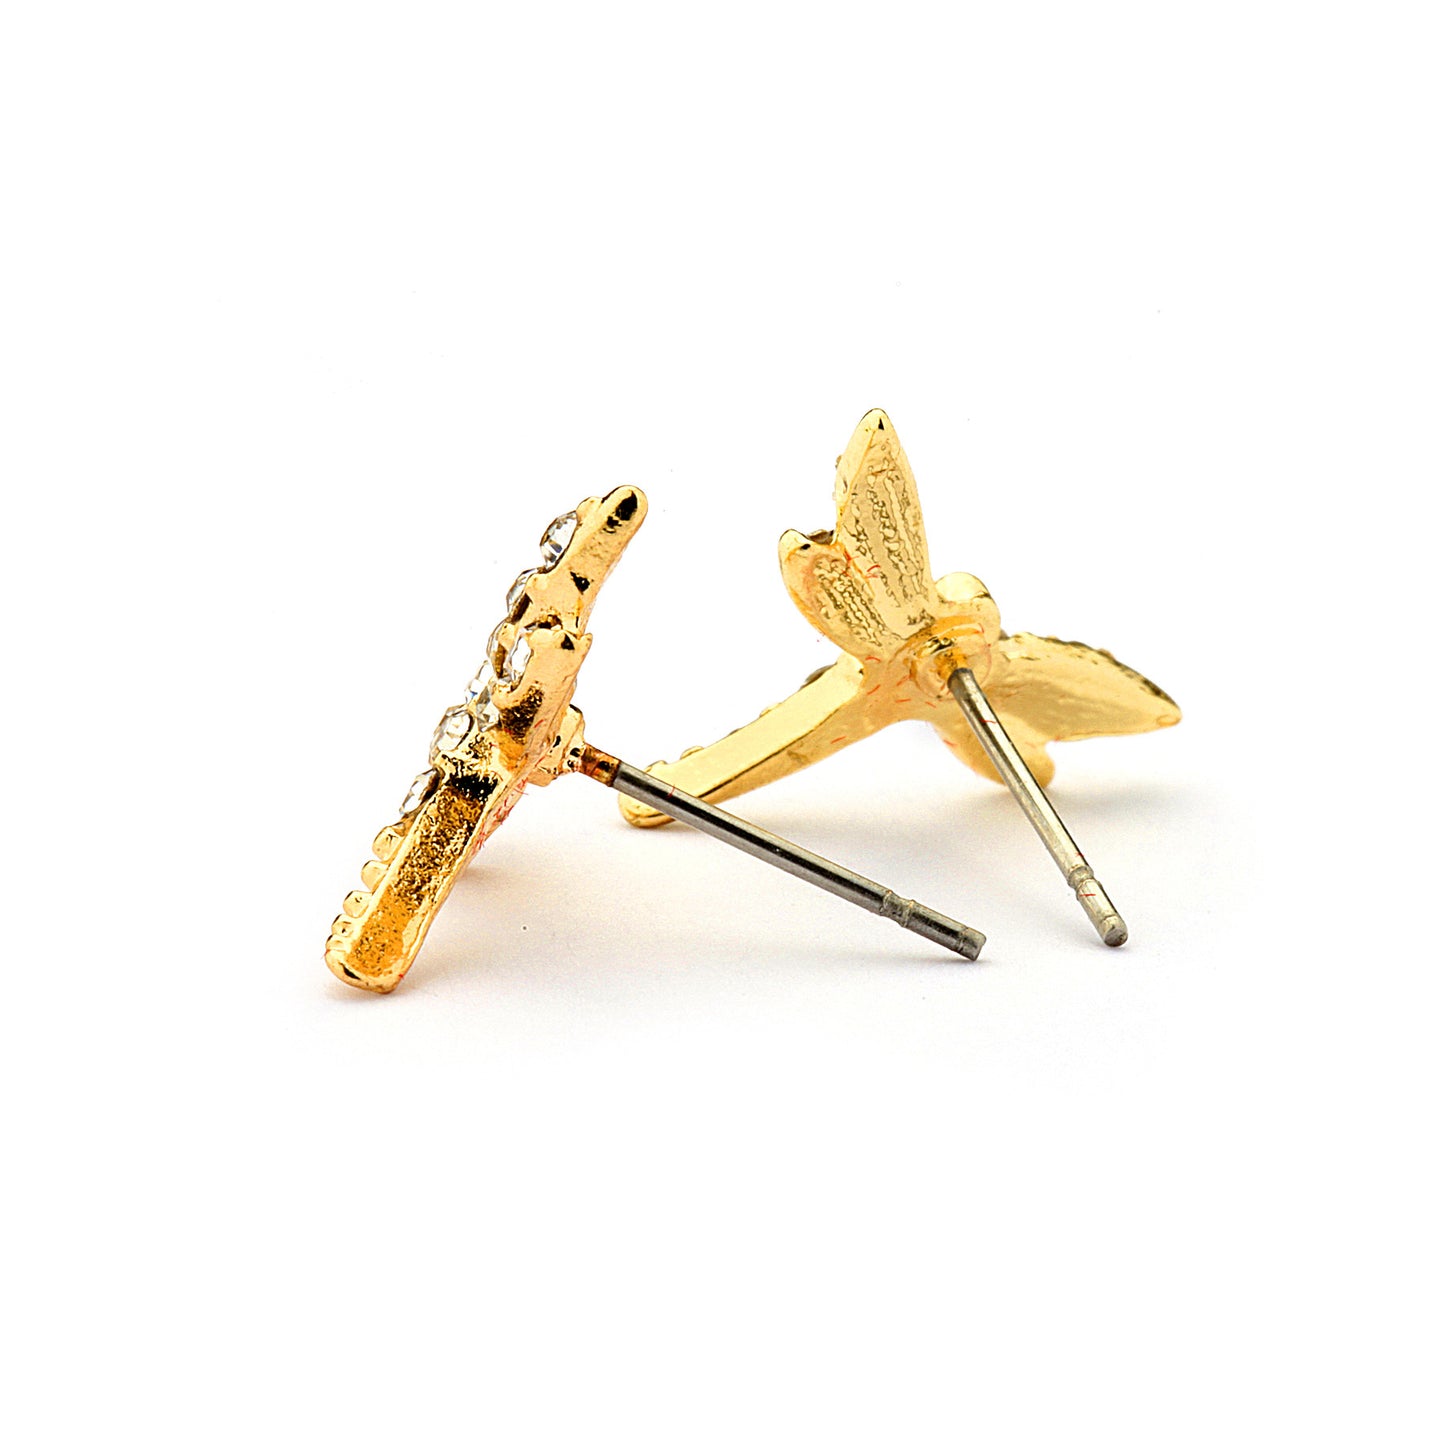 Pave CZ Dragonfly Earrings 14-kt Gold Filled